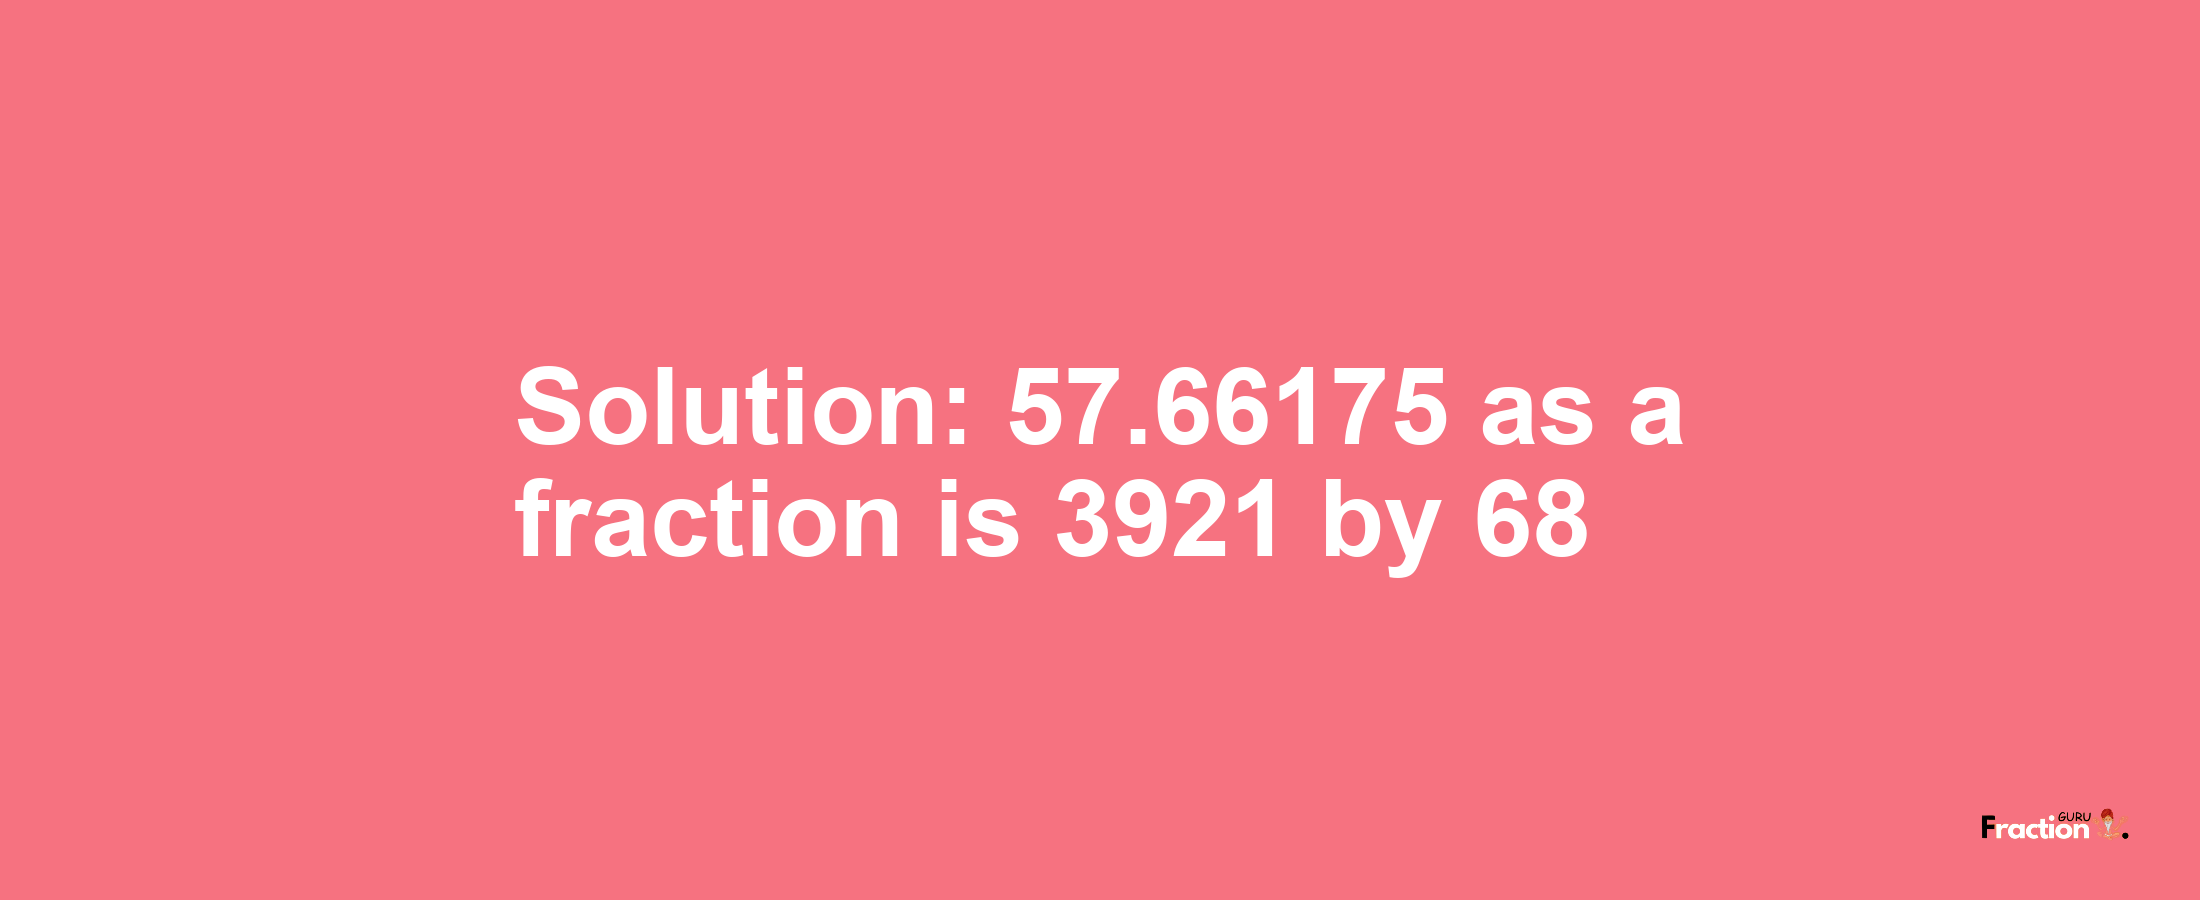 Solution:57.66175 as a fraction is 3921/68